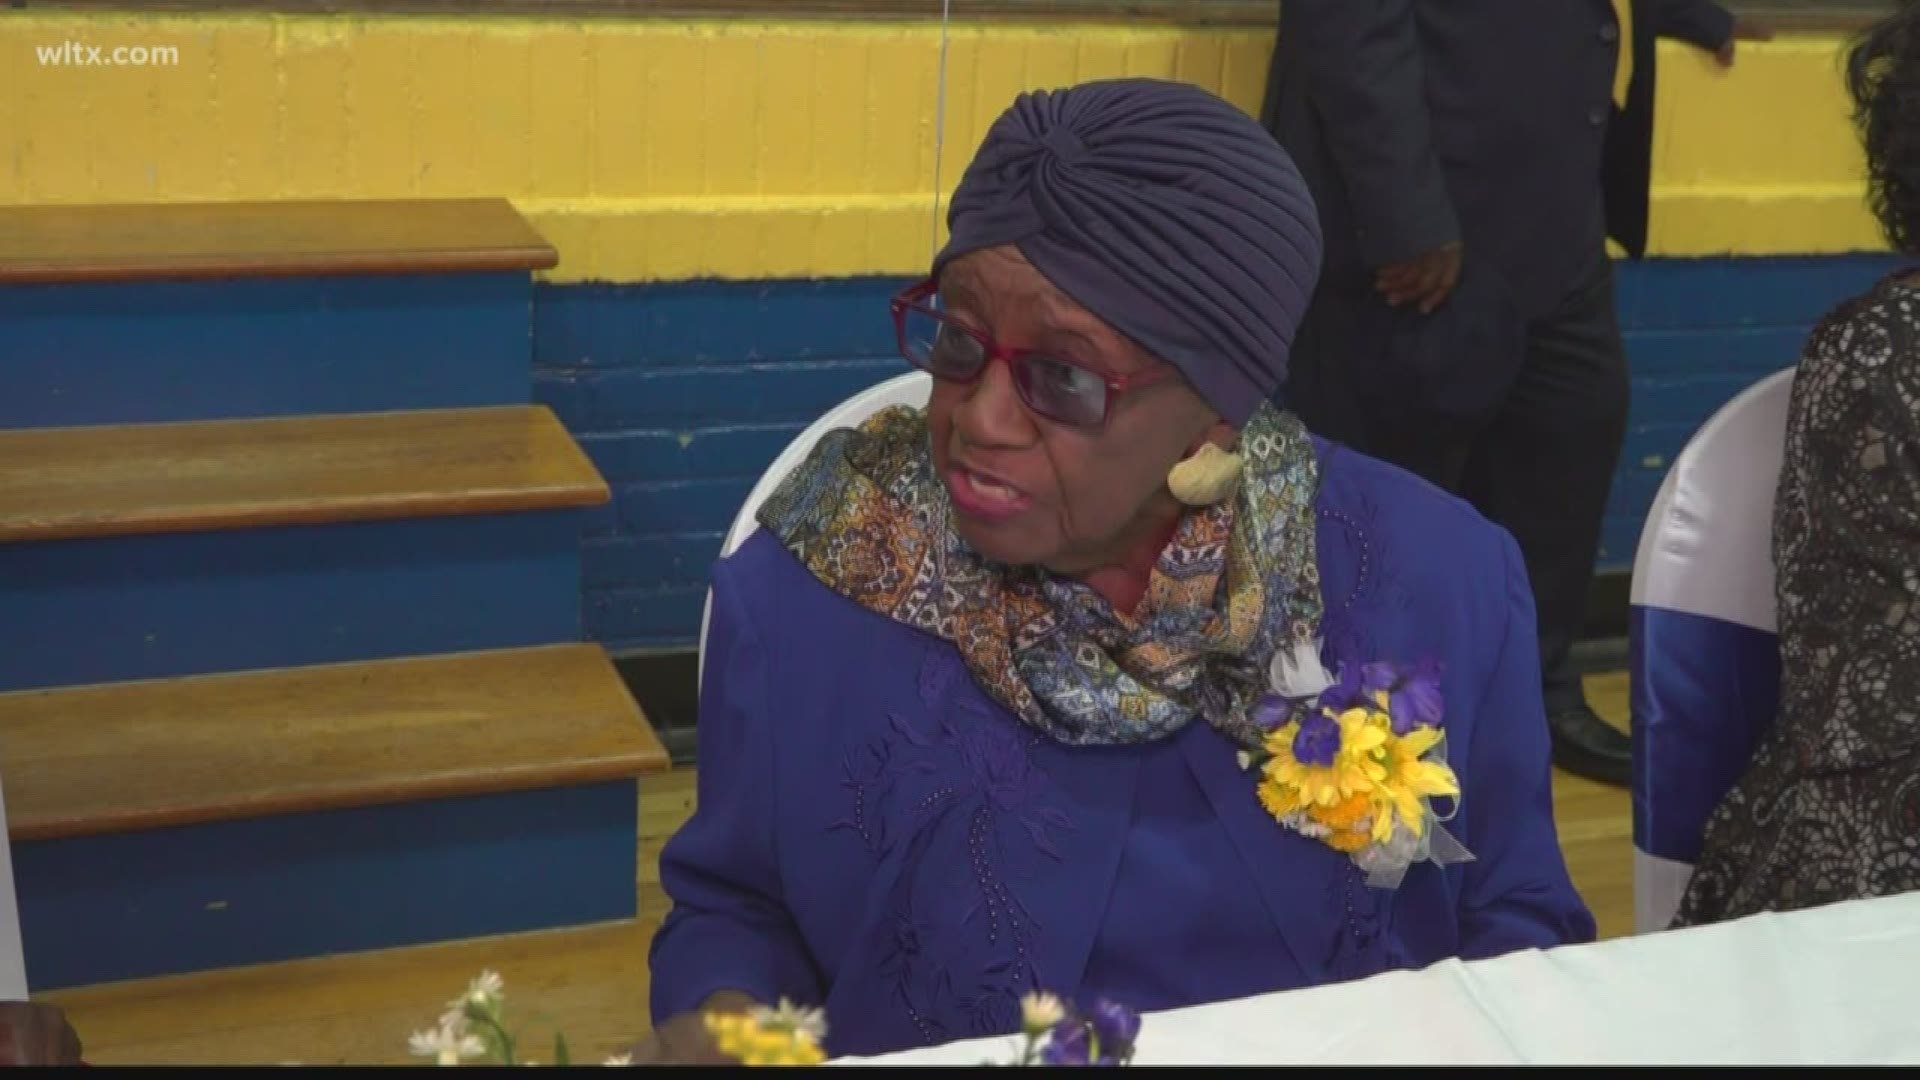 Thelma P. Strother of Lexington celebrated her 100th birthday surrounded by friends and family